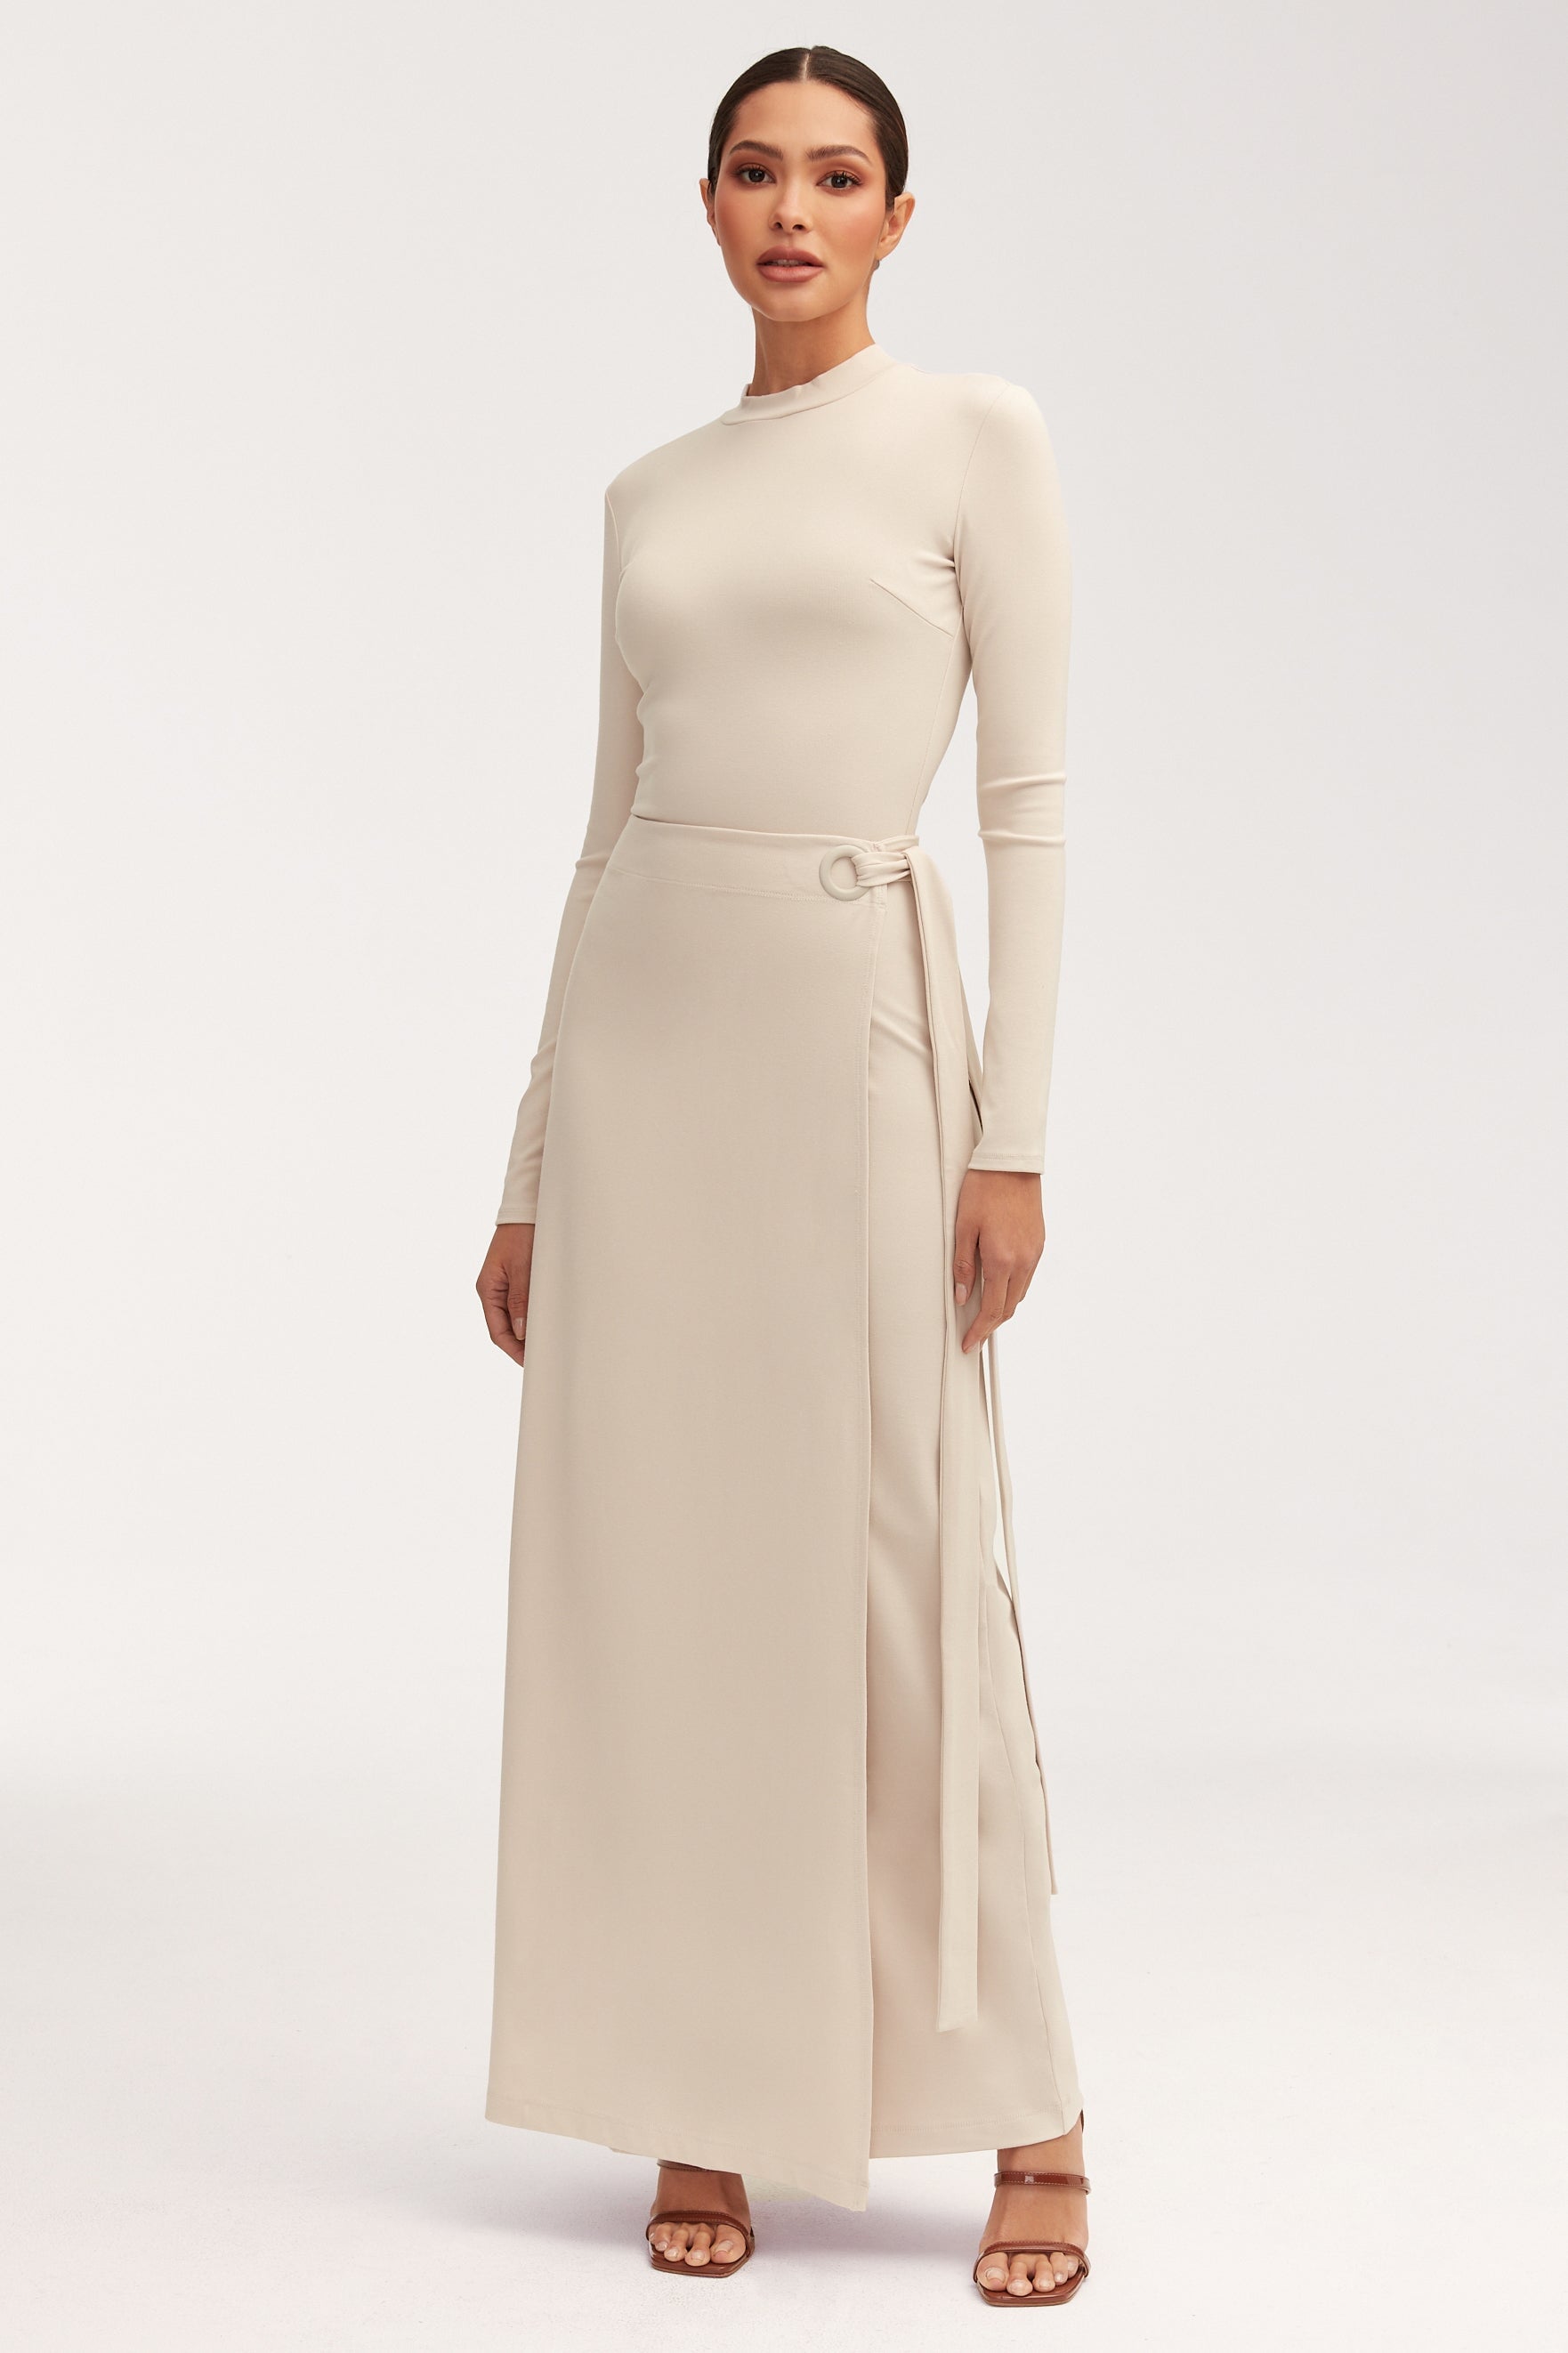 Melissa Jersey Maxi Dress with Wrap Skirt - Stone Sets Veiled 